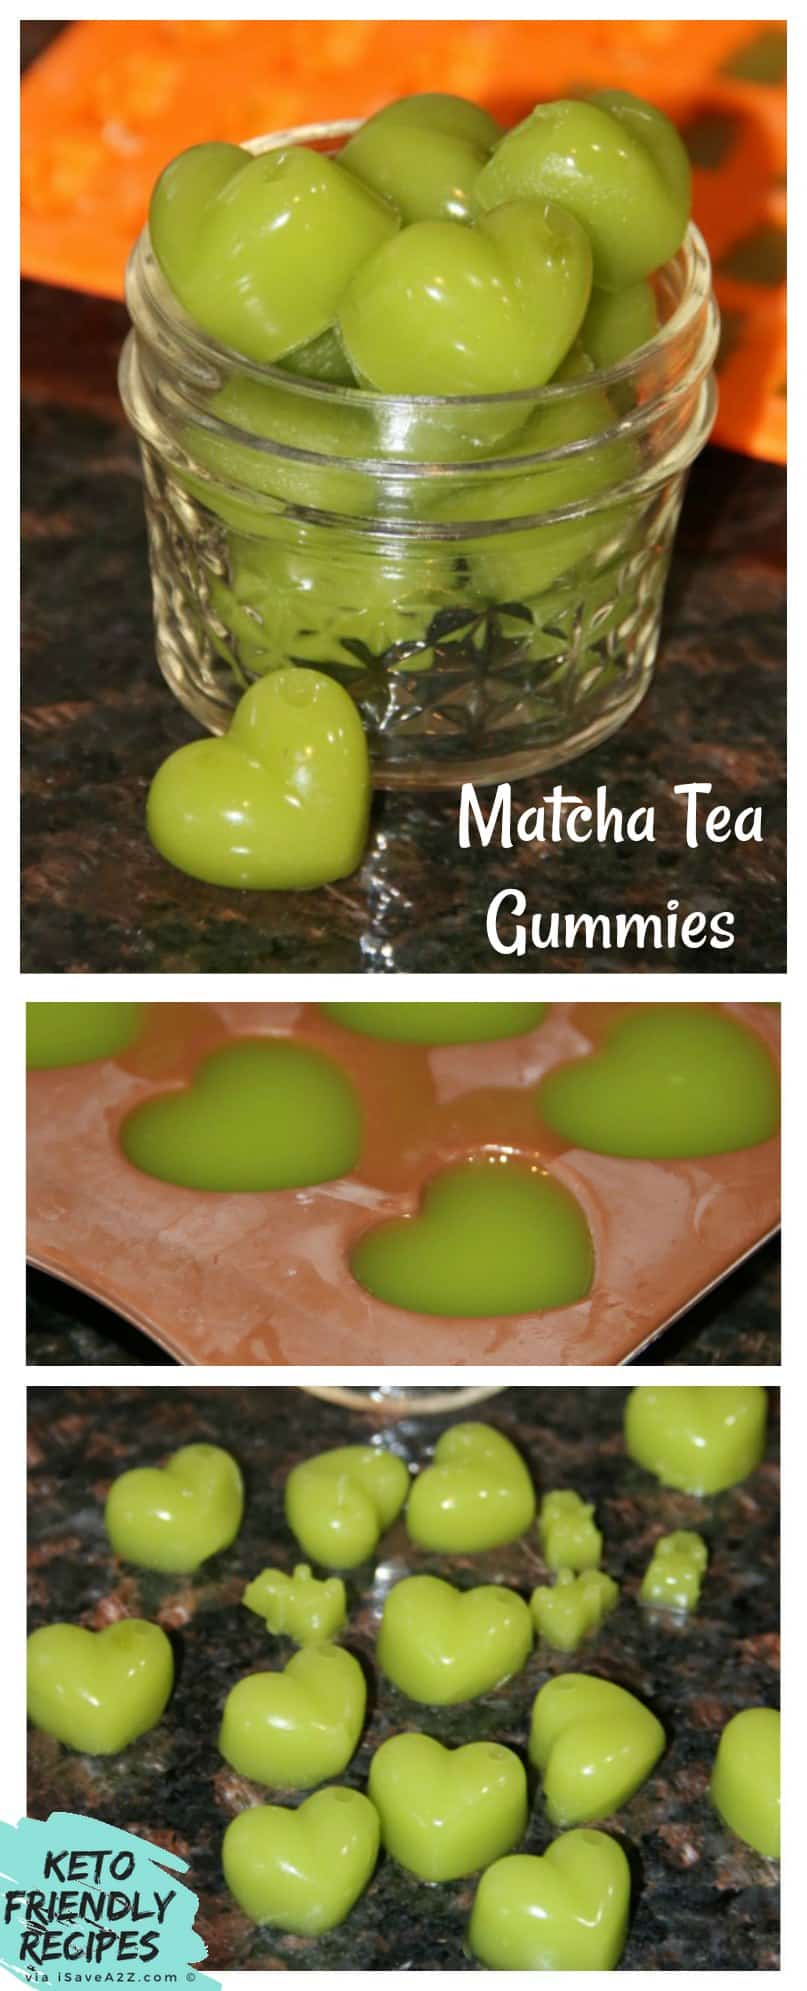 This Sugar Free Gummies Recipe is a MUST TRY! We made Matcha Tea gummies but you can make them any flavor you want. The recipe is simple too! Healthy gummie options that you can make at home.